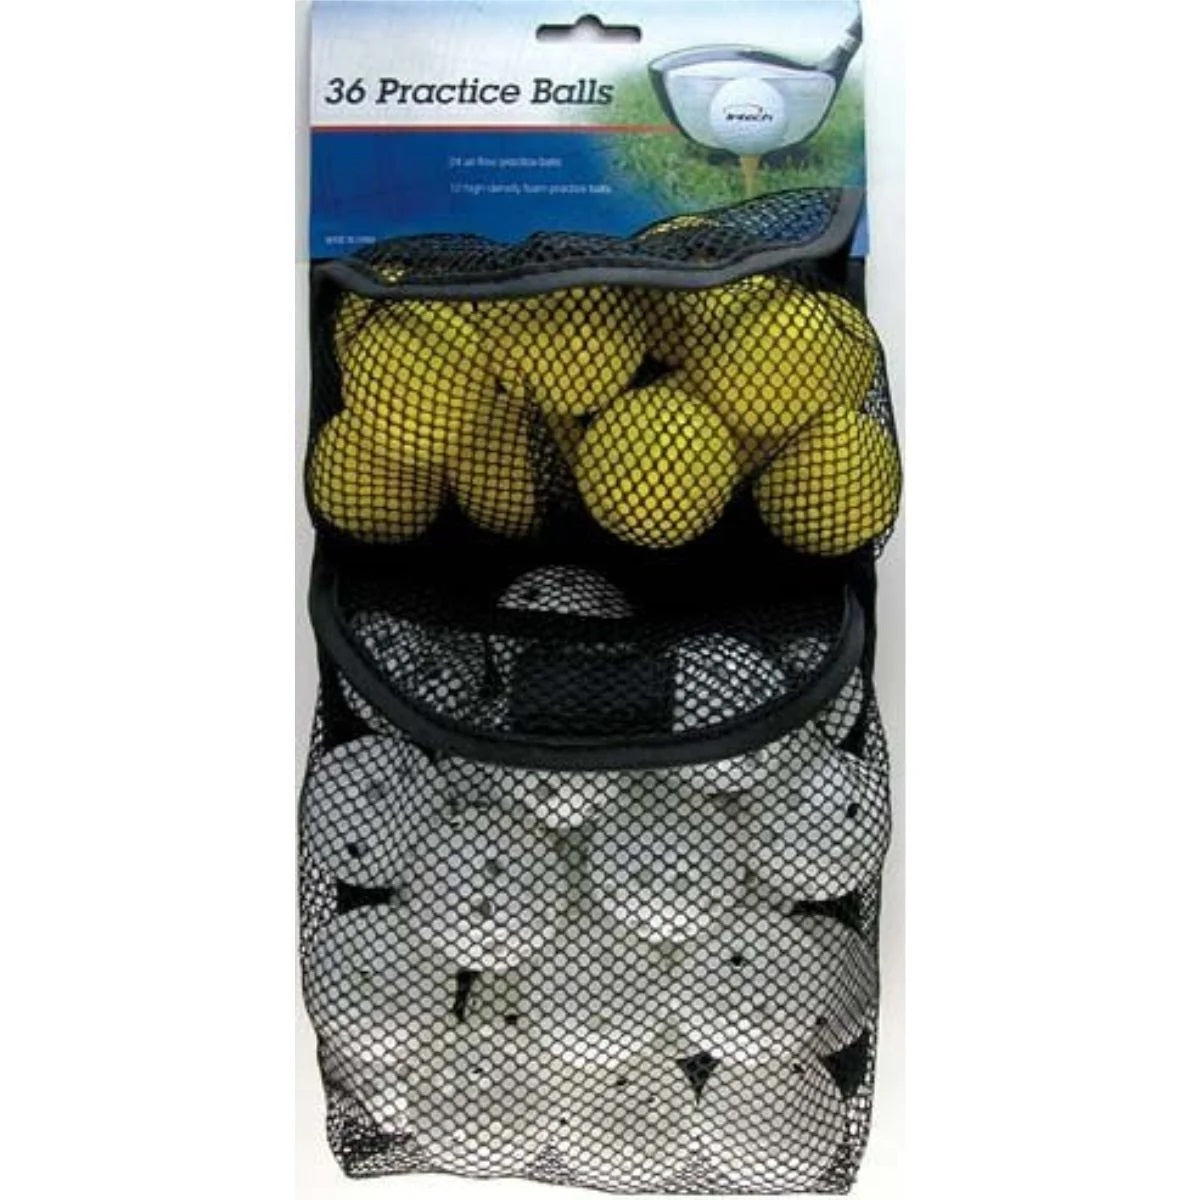 24 white plastic and 12 yellow foam Intech Practice Golf Balls in closeable mesh bag